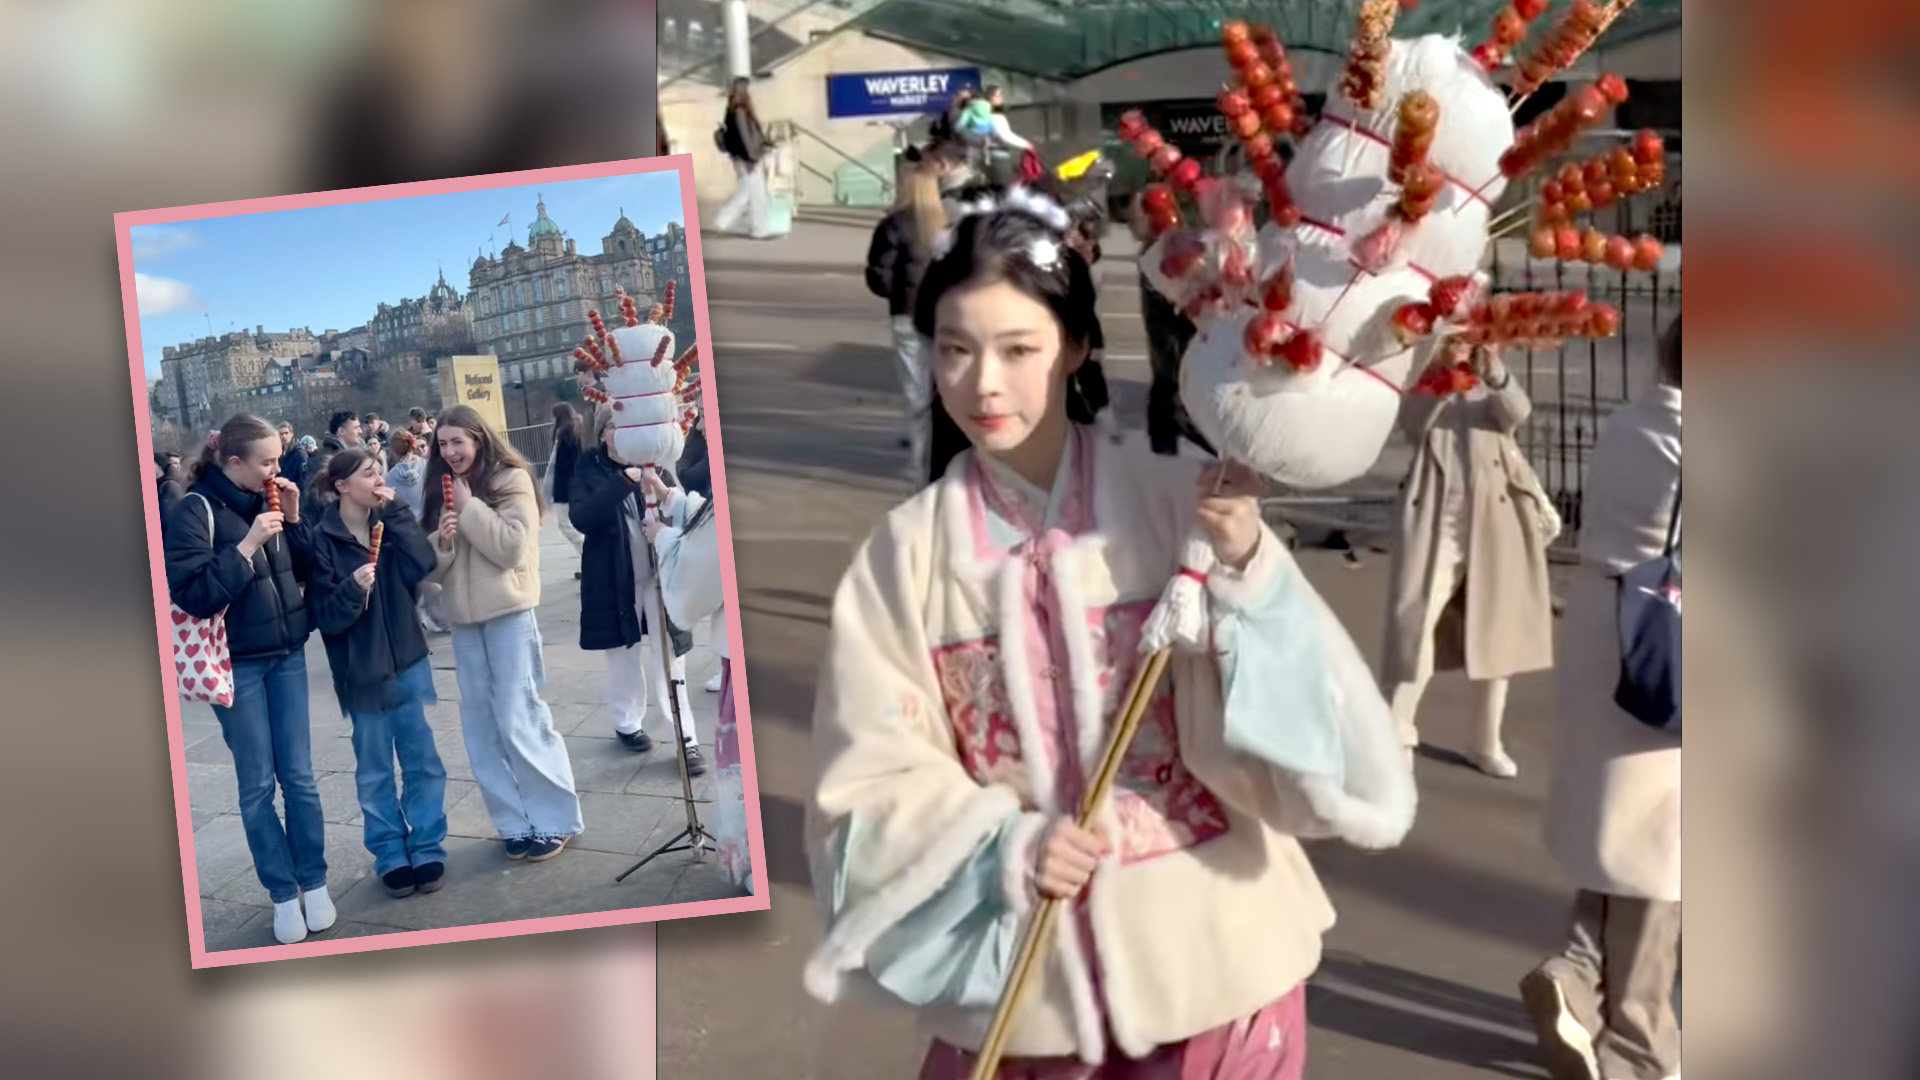 A traditional Hanfu-clad young student from China is making a mark in London by handing out the types of snacks she enjoyed as a child growing up to passers-by in a bid to spread Chinese culture. Photo: SCMP composite/Douyin